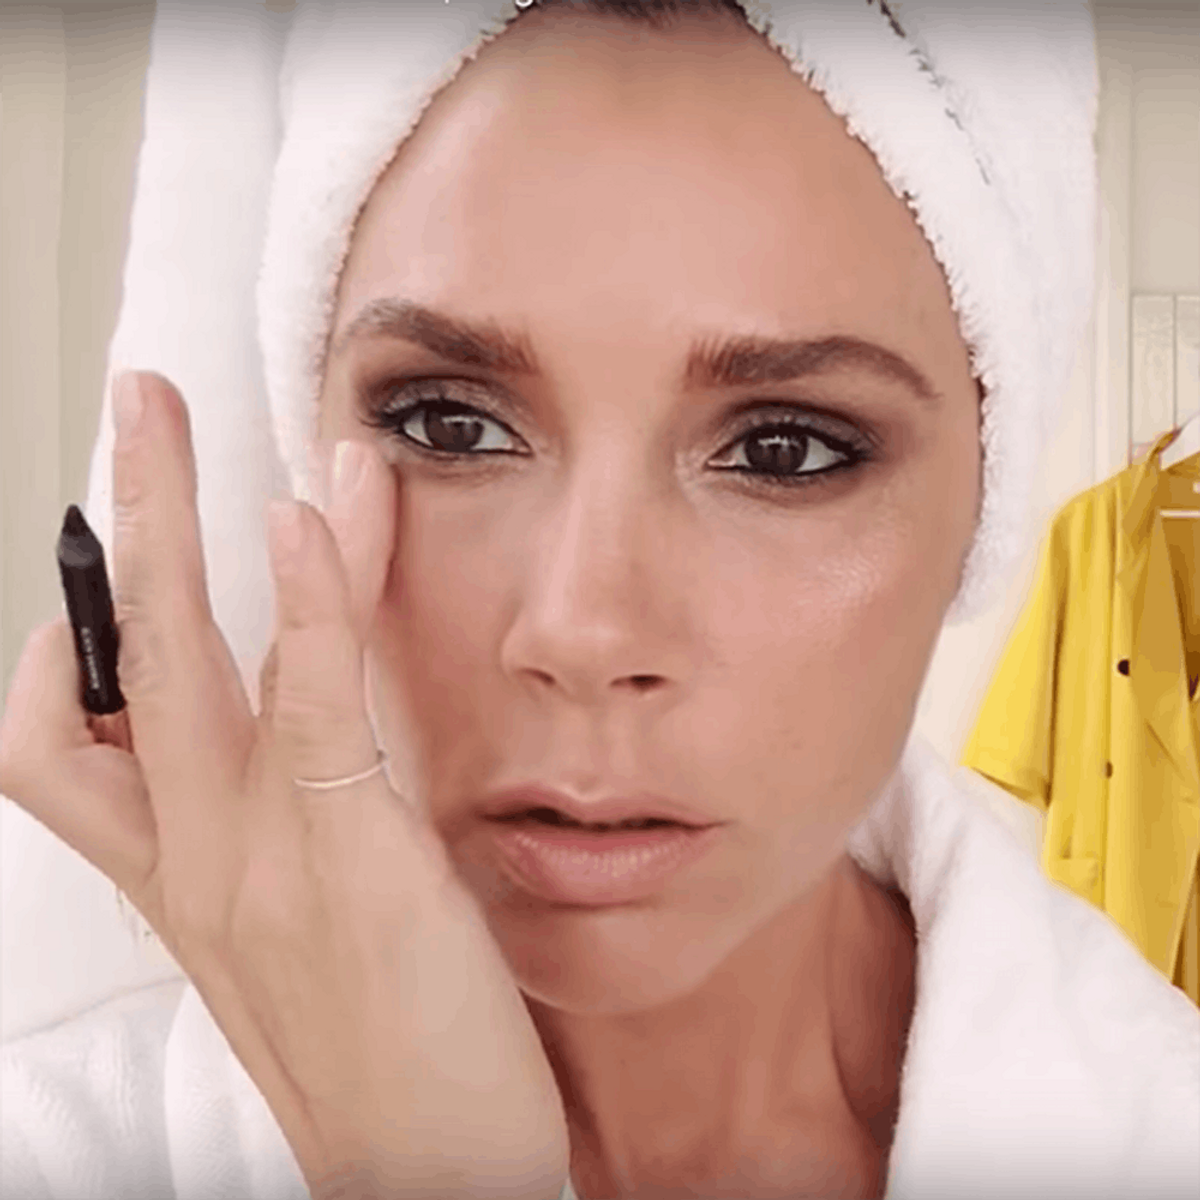 Victoria Beckham’s 5-Minute Makeup Routine Is Mesmerizing to Watch